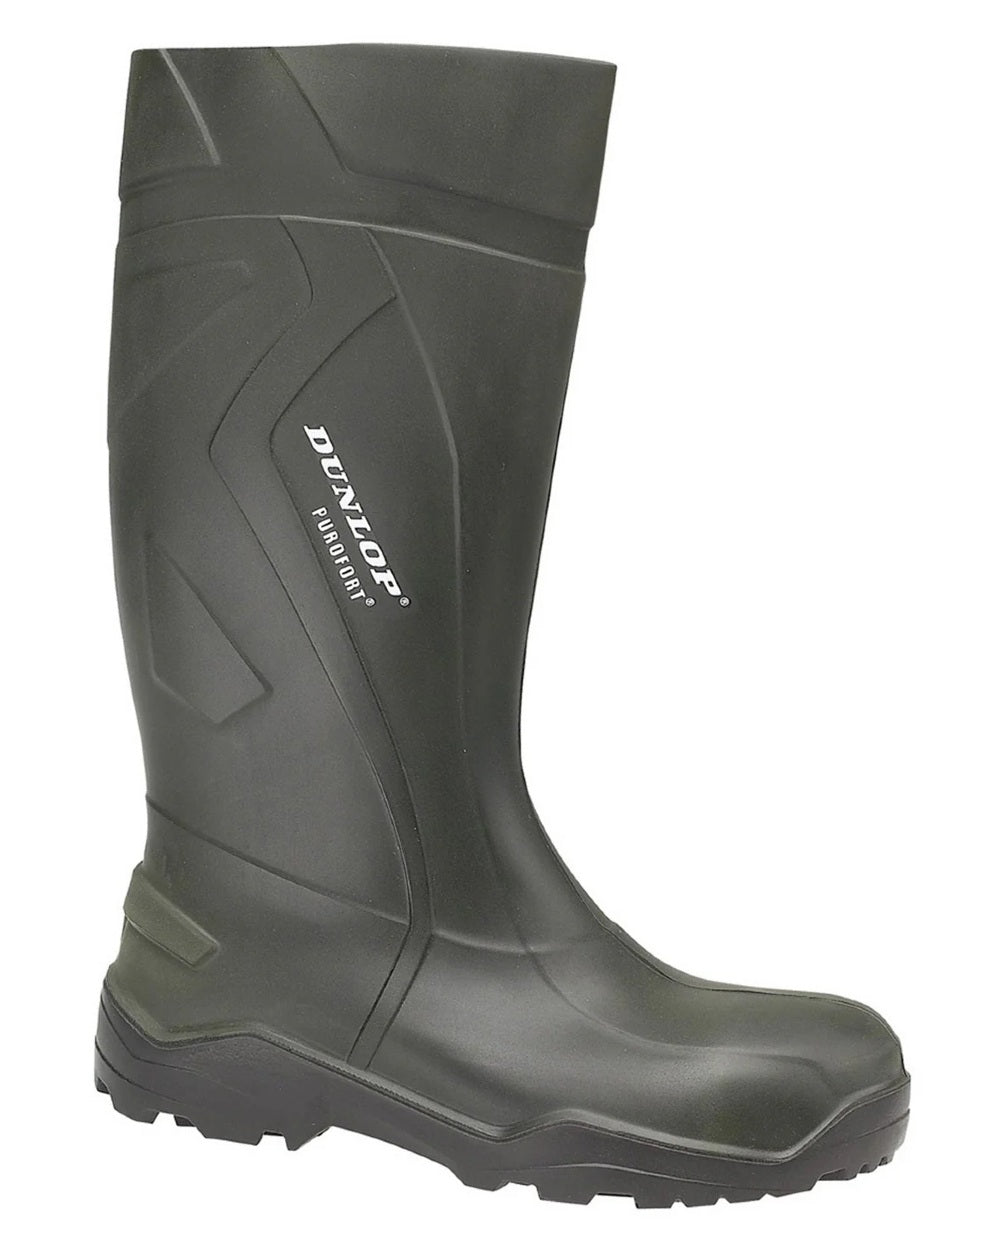 Green coloured Dunlop Purofort+ Wellingtons on white background 